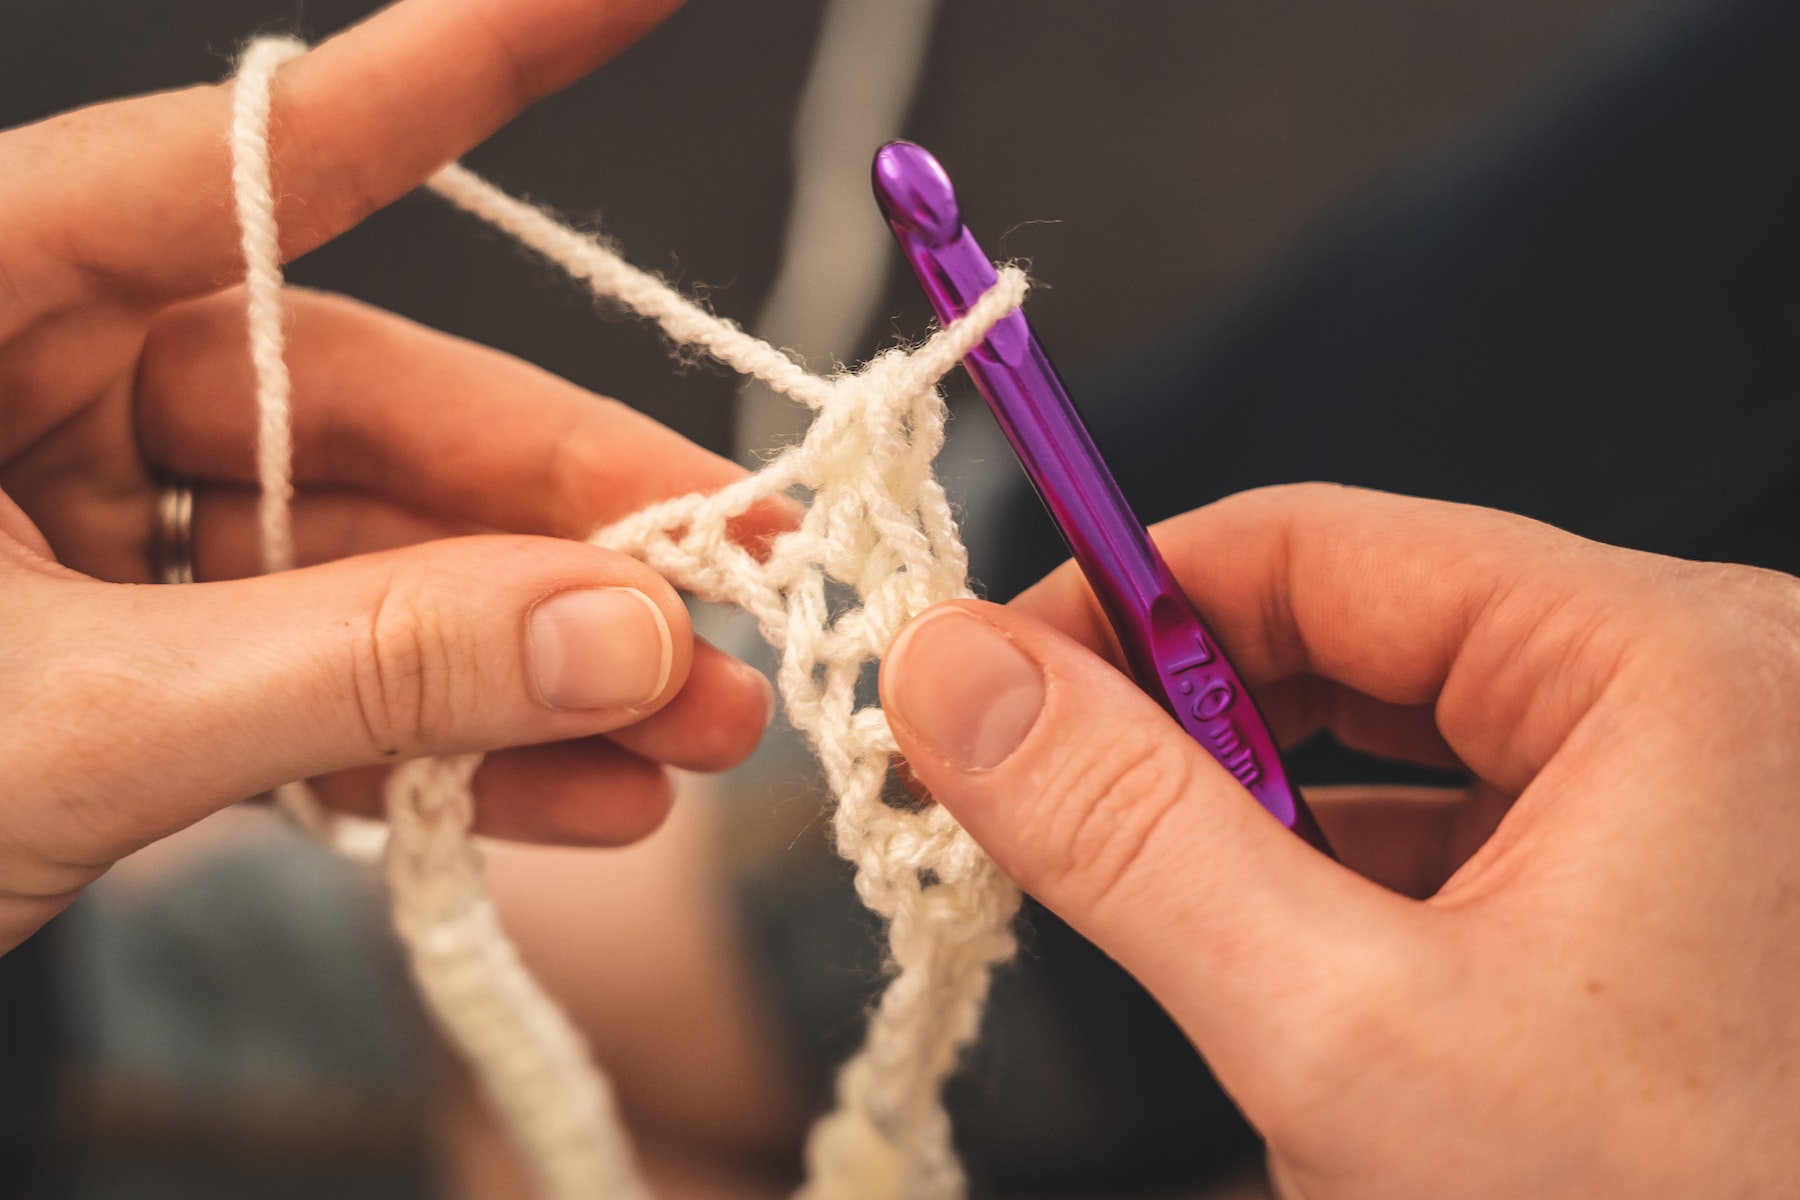 Person Holding Purple Crochet Hook and White Yarn